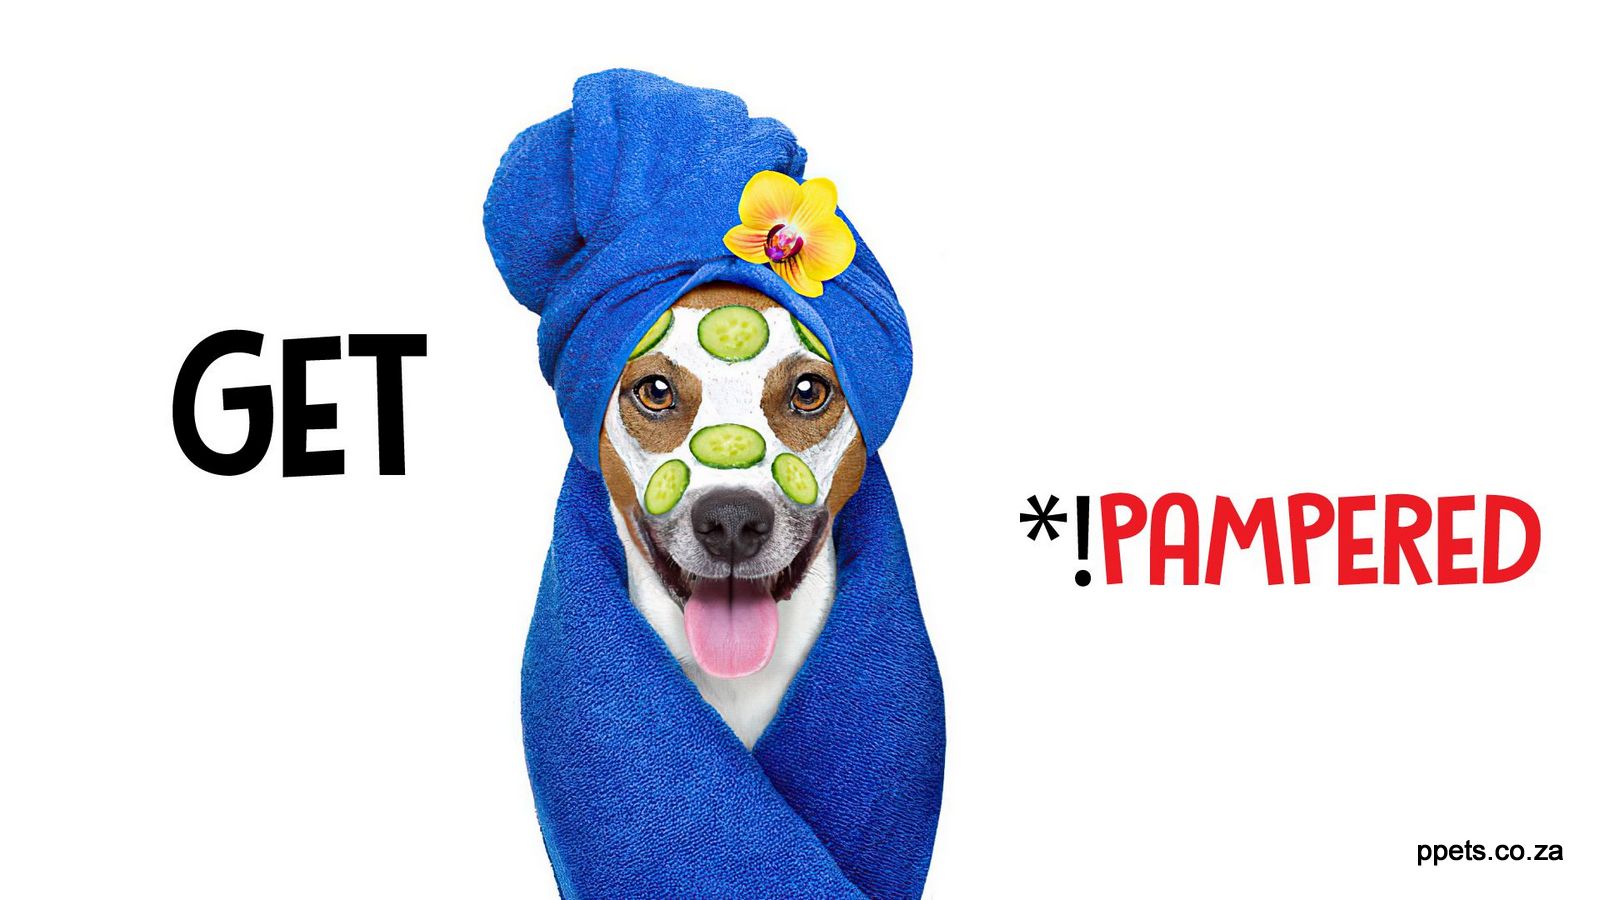 Pampered Pets East London's best Pet Shopand Grooming Salon